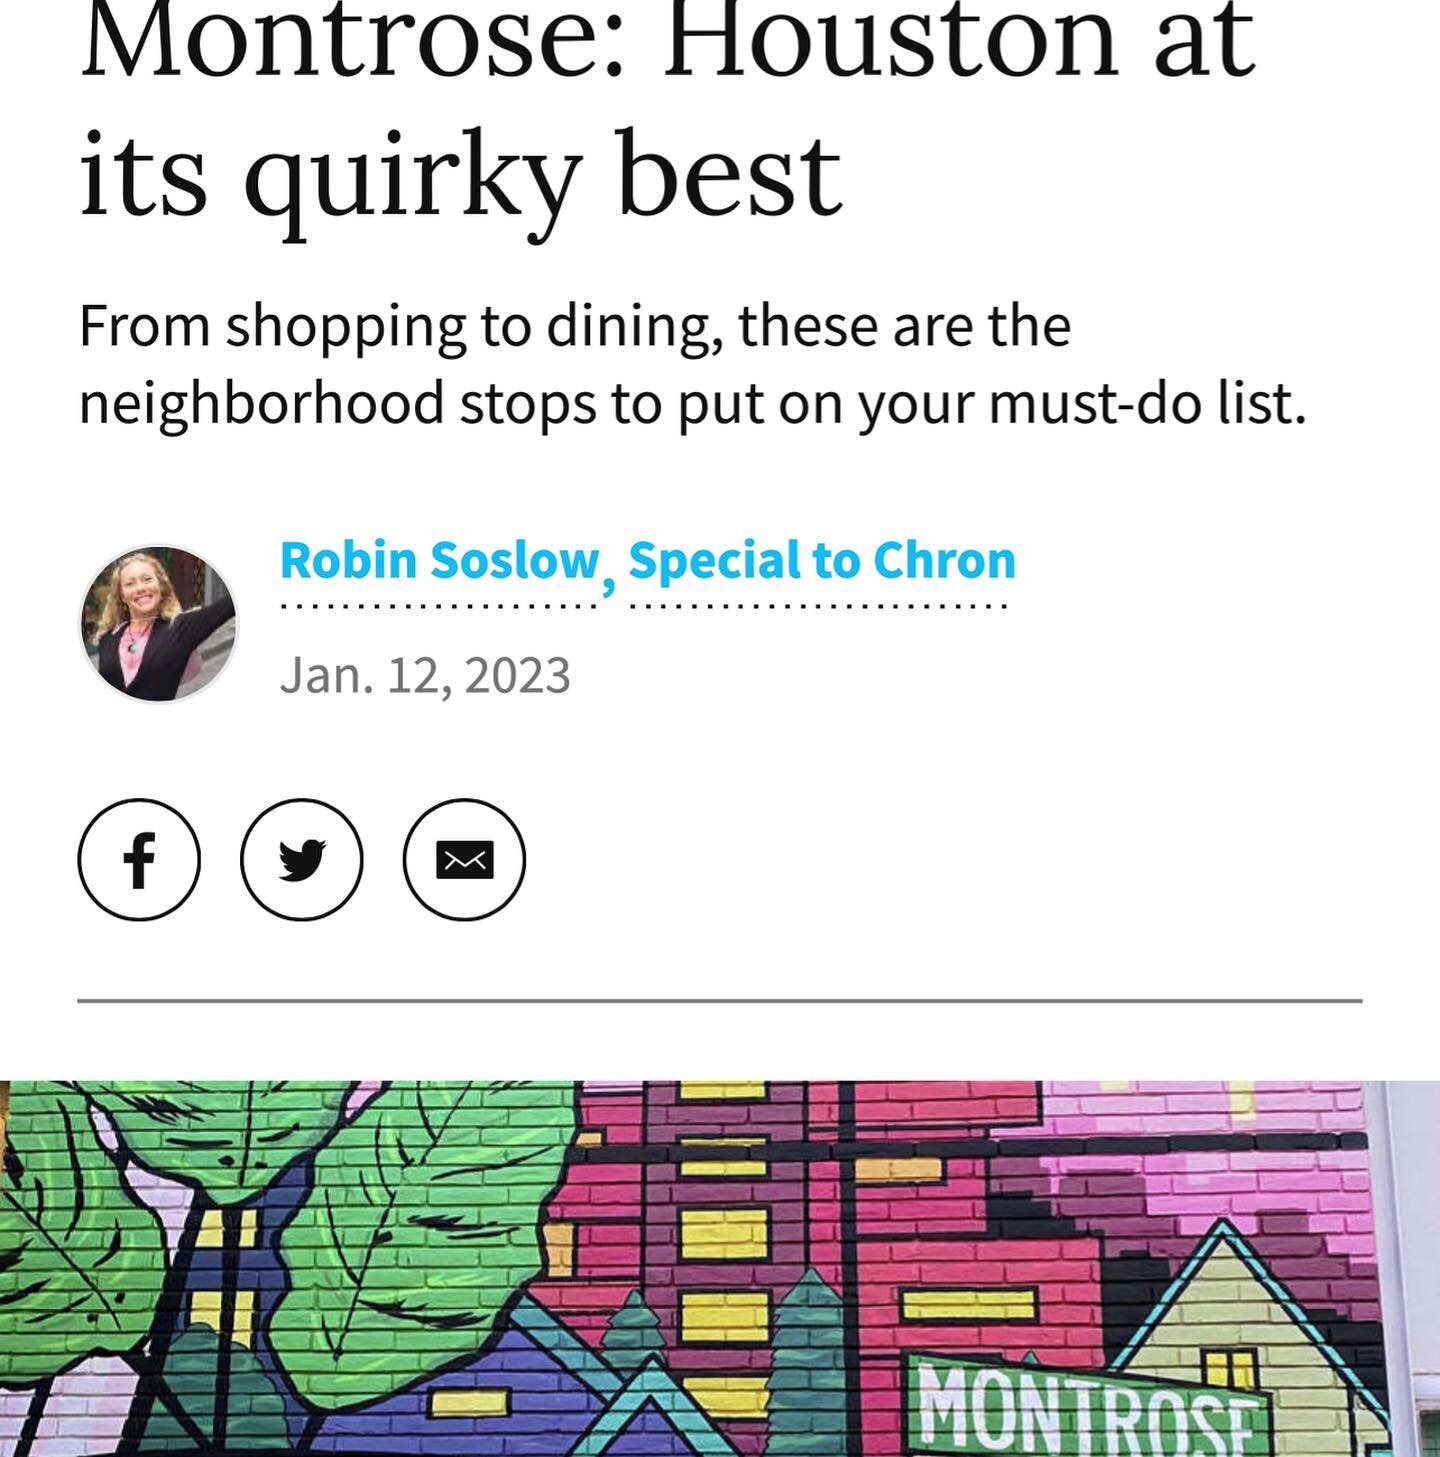 Y&rsquo;all&hellip;How cool is this?! 

A huge thank you to Robin Soslow @chron_com for mentioning us and the feature in this awesome article for the Montrose Neighborhood!!

We appreciate being recognized as a part of this special neighborhood and c